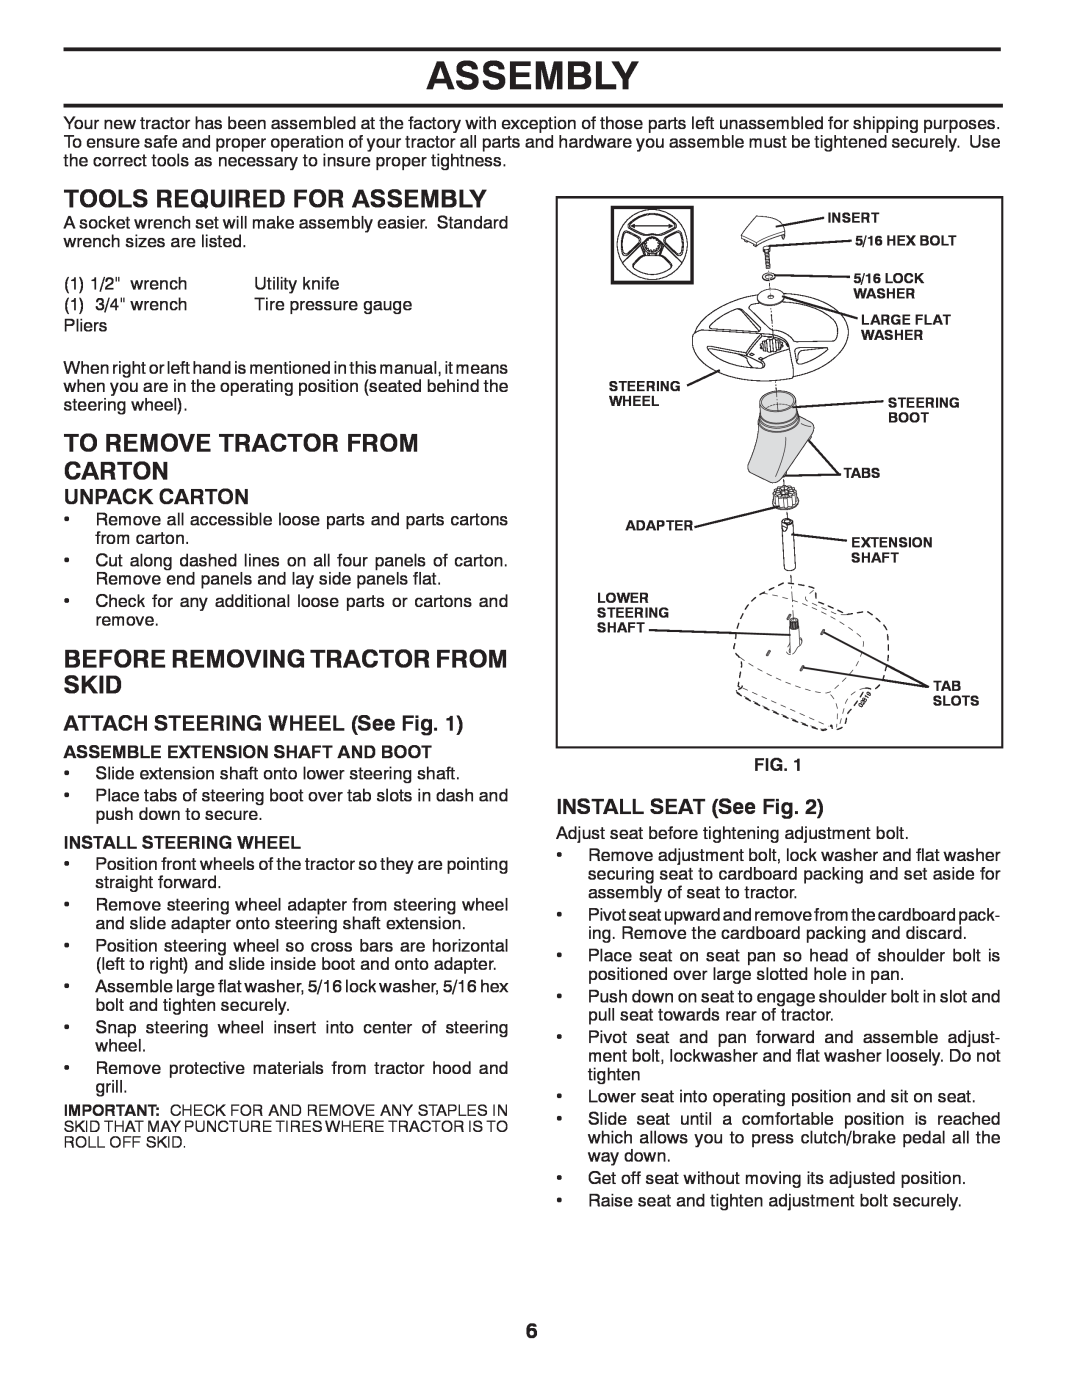 Poulan 425001 manual Tools Required For Assembly, To Remove Tractor From Carton, Before Removing Tractor From Skid 